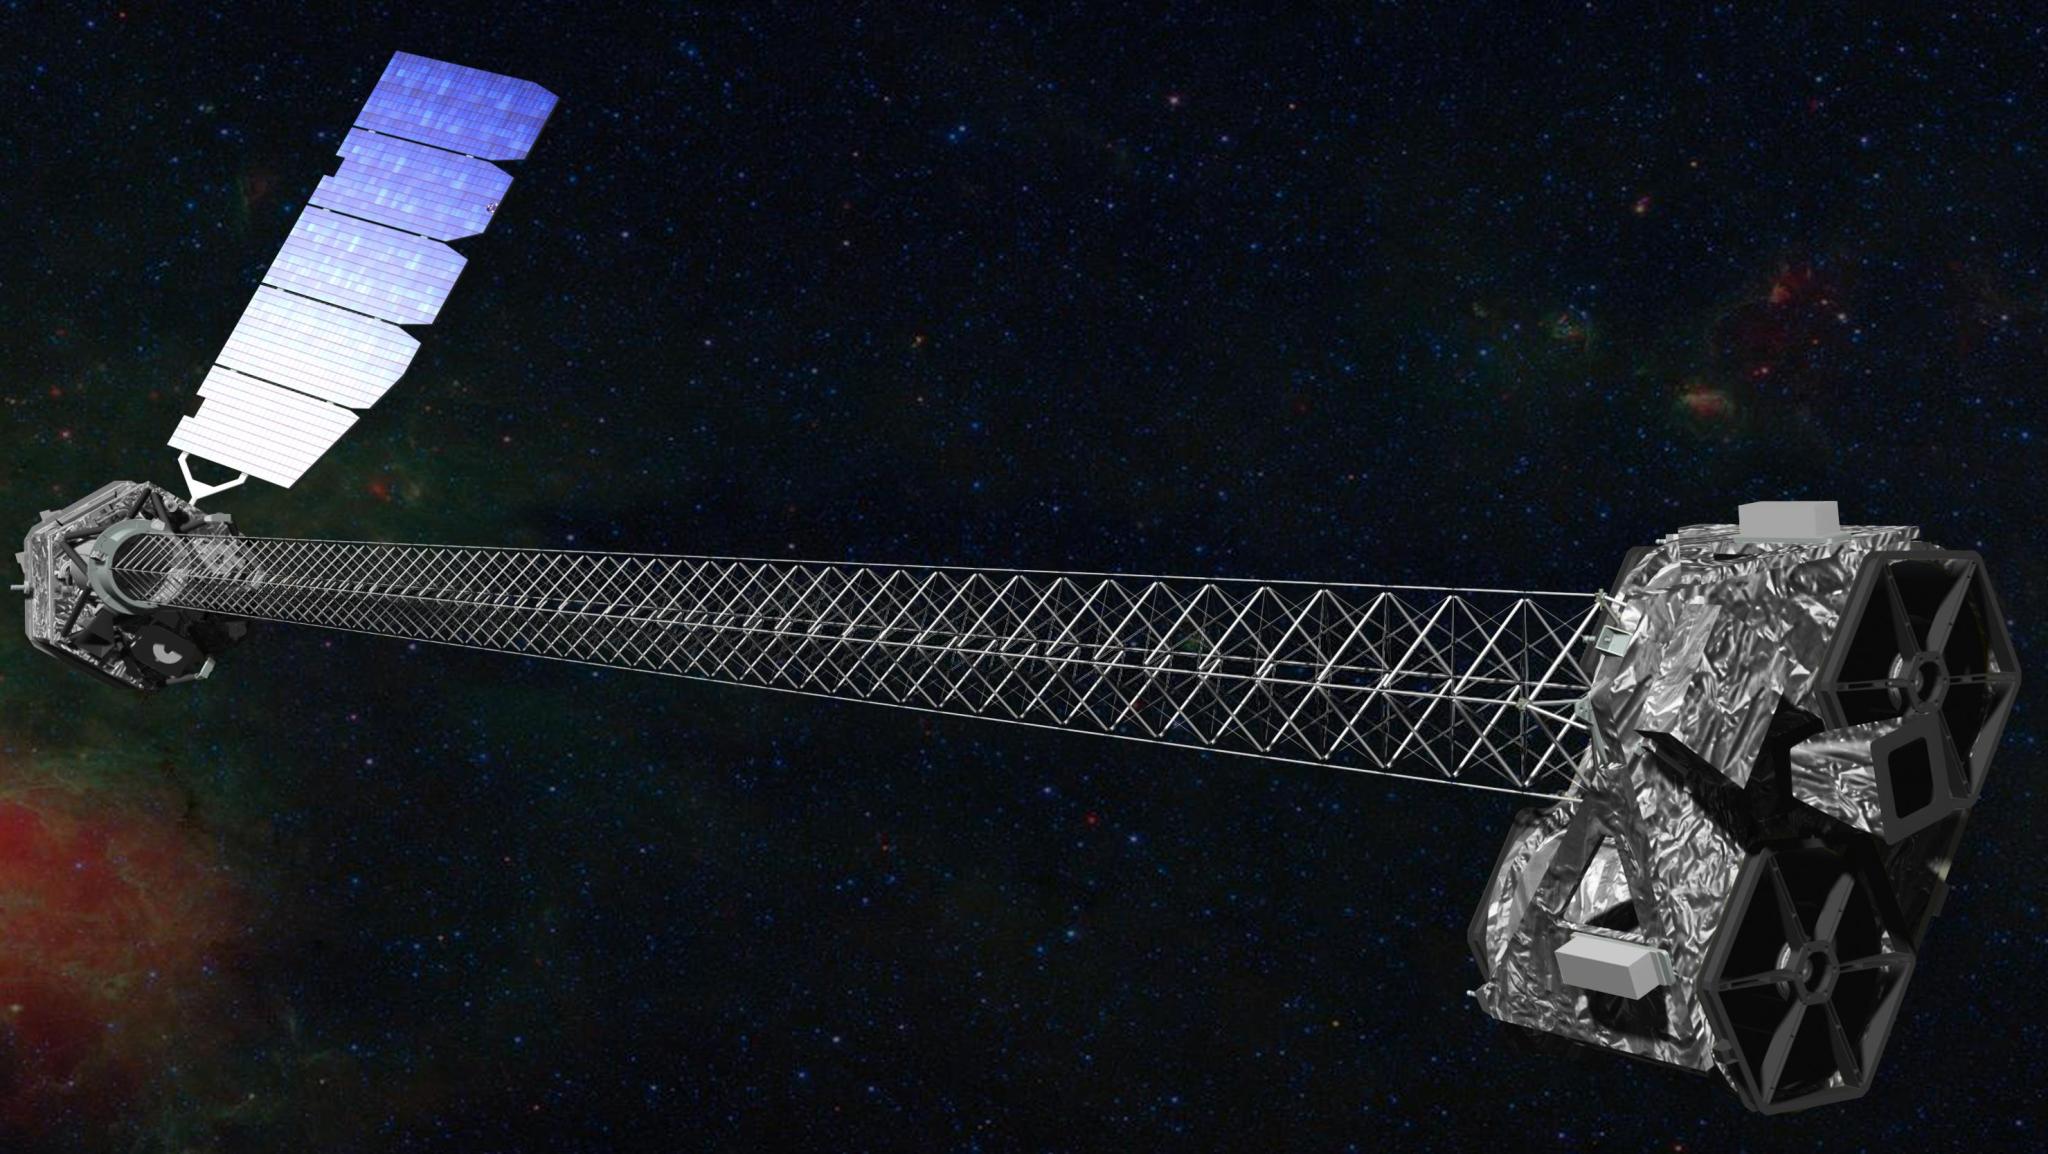 Illustration of the NuSTAR spacecraft, which has a 30-foot (10 meter) mast that separate the optics modules (right) from the detectors in the focal plane (left).